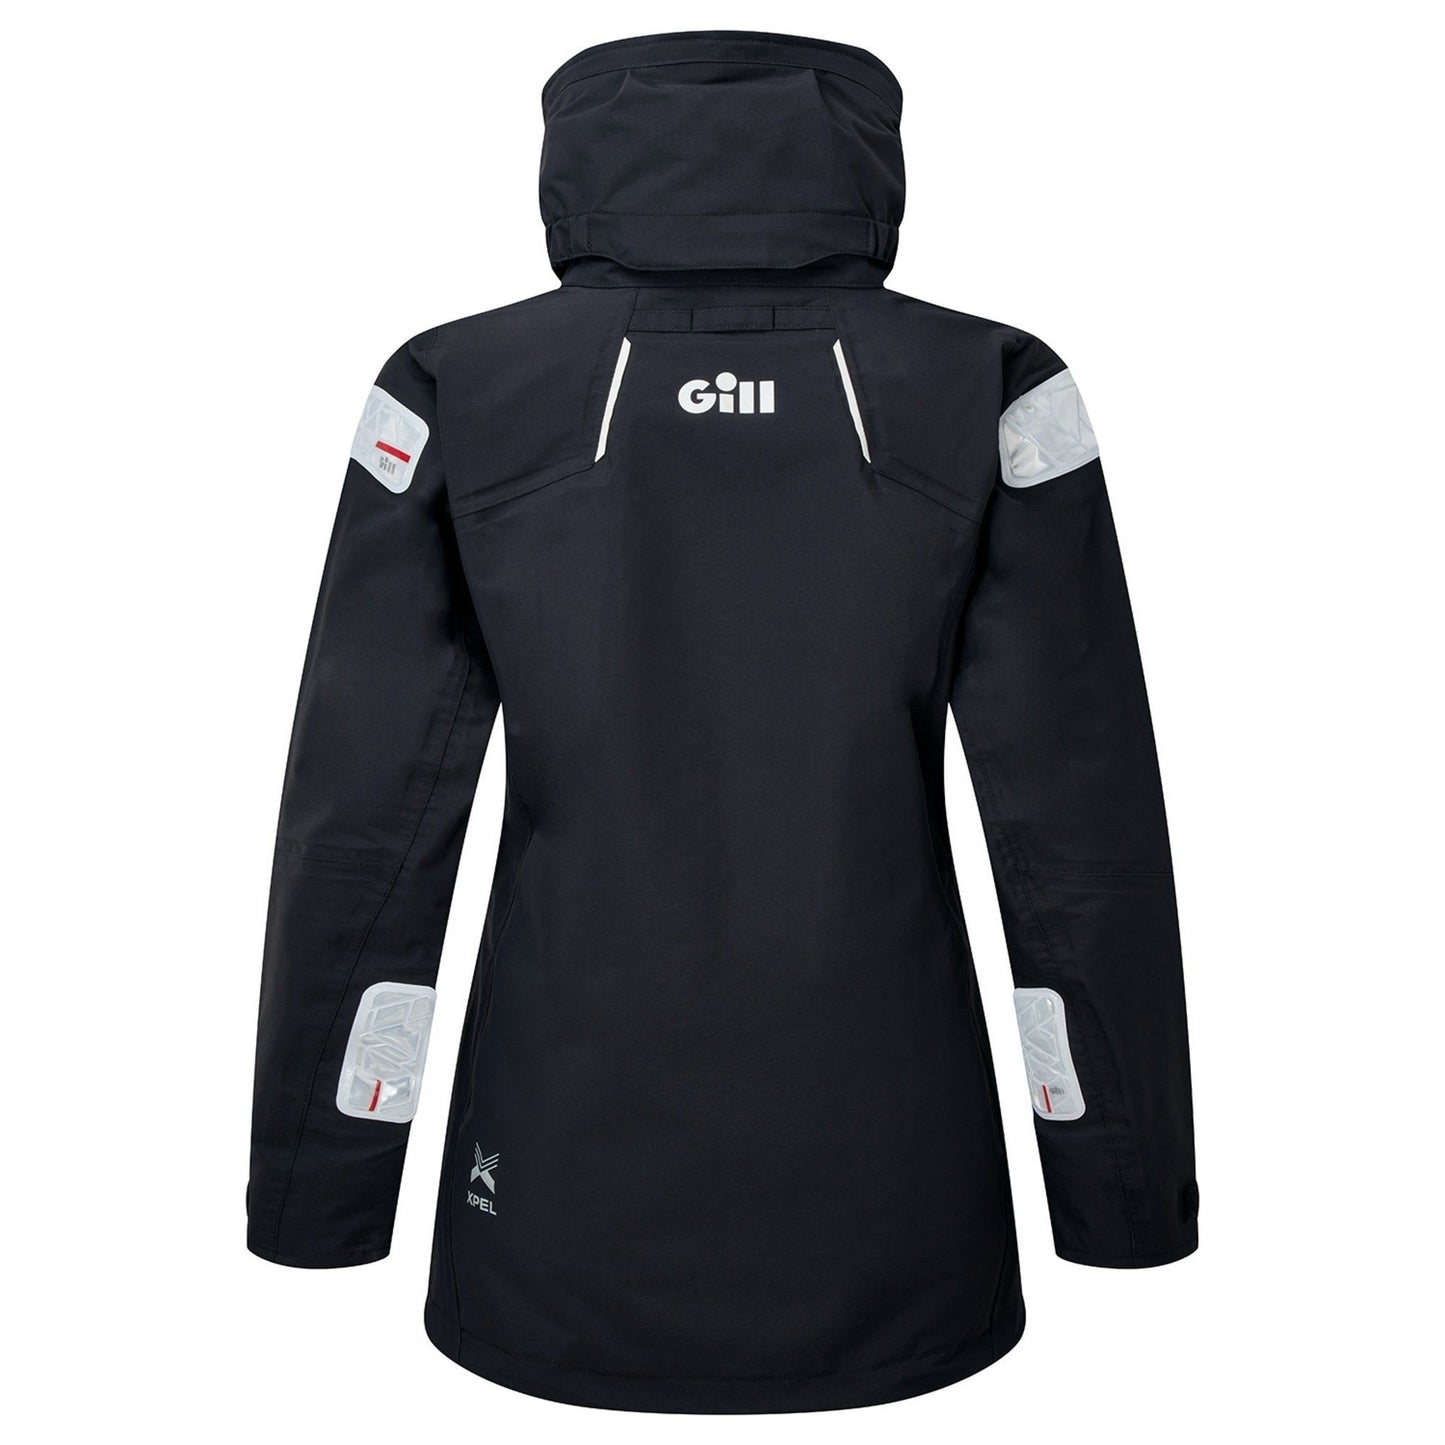 Gill OS25JW Graphite Women's Offshore Jacket